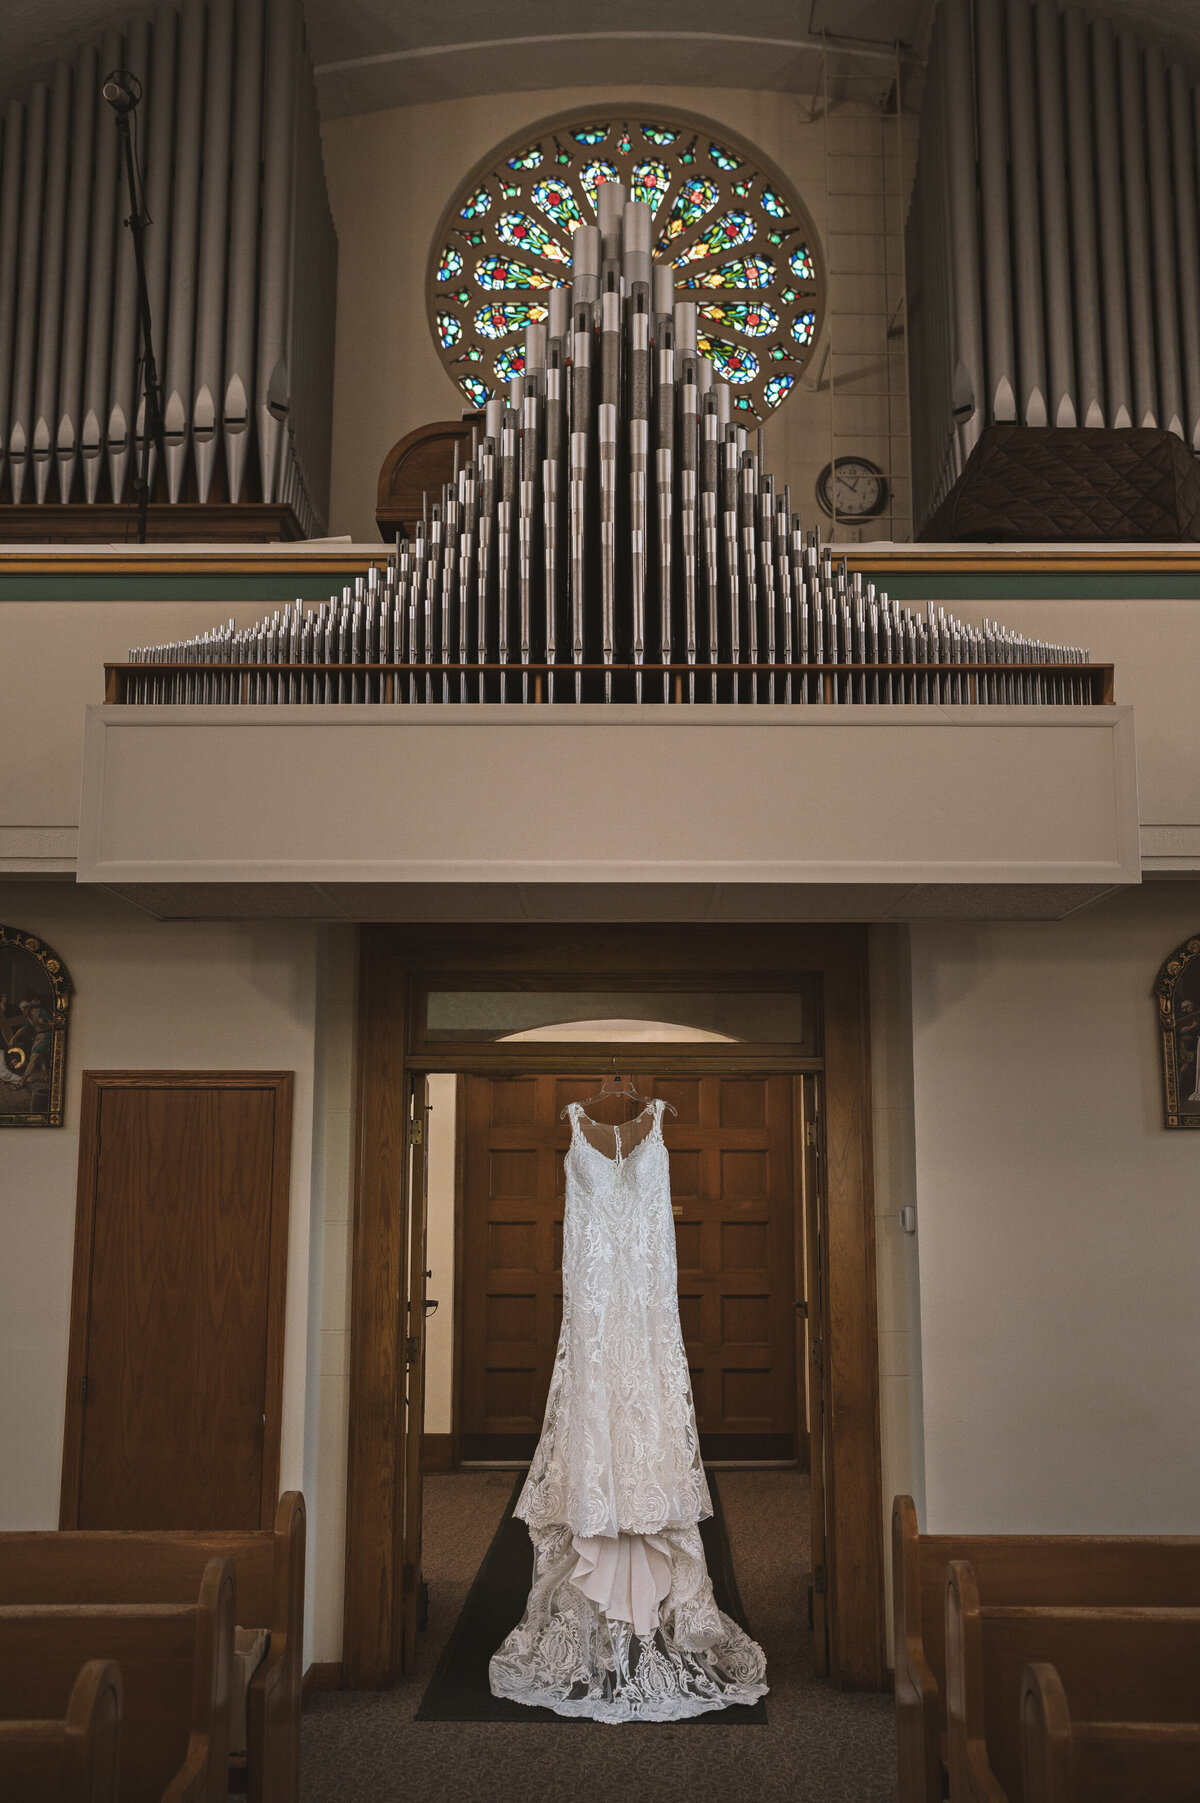 Wedding dress hanging in church below stained glass window.